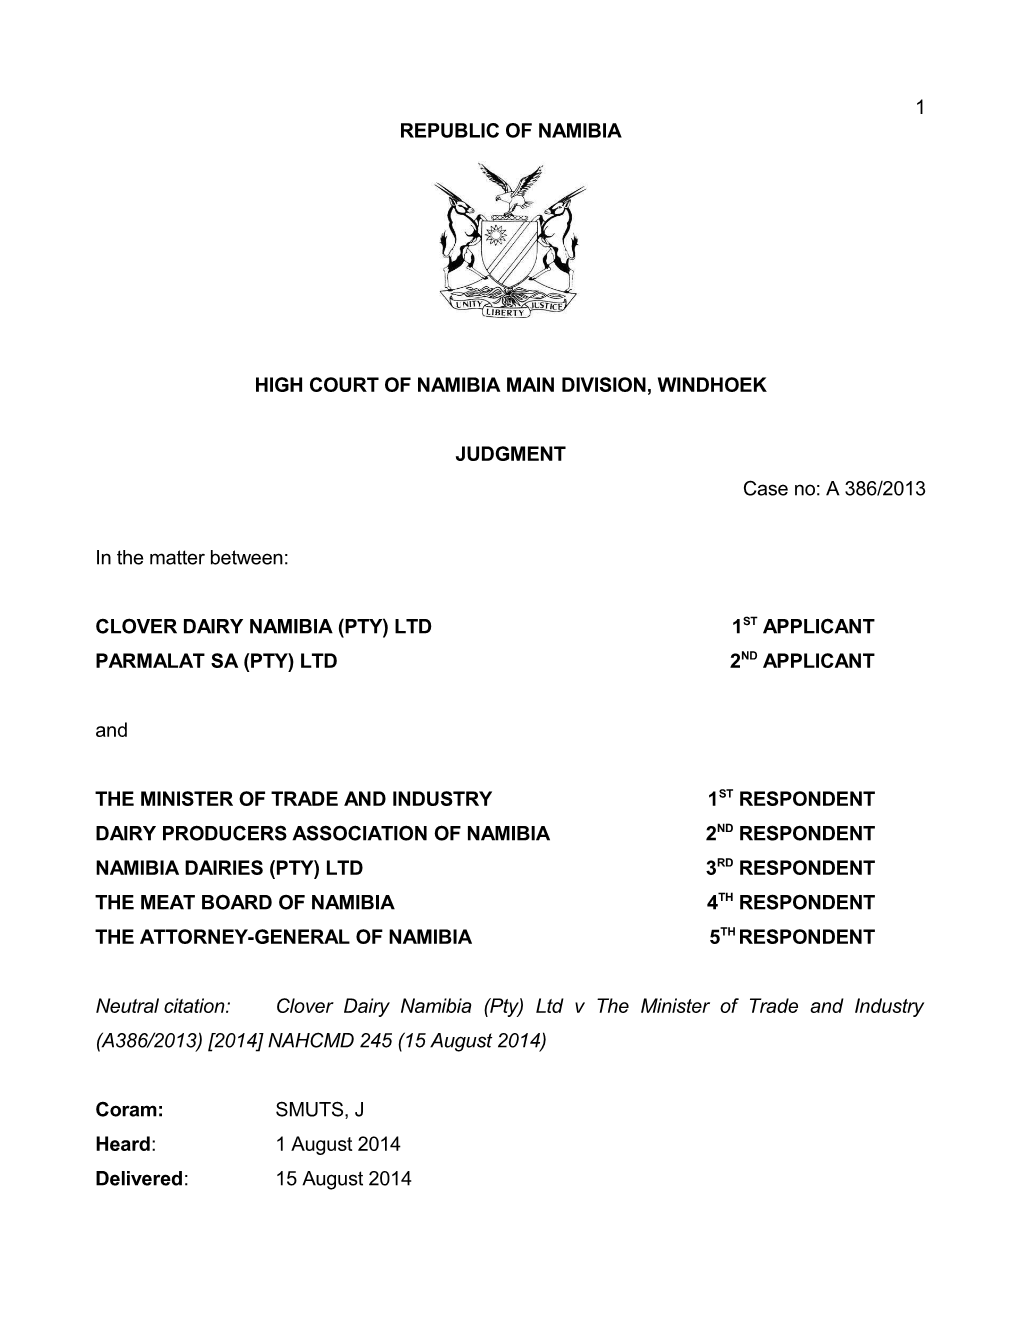 Clover Dairy Namibia (Pty) Ltd V the Minister of Trade and Industry (A386-2013) 2014 NAHCMD